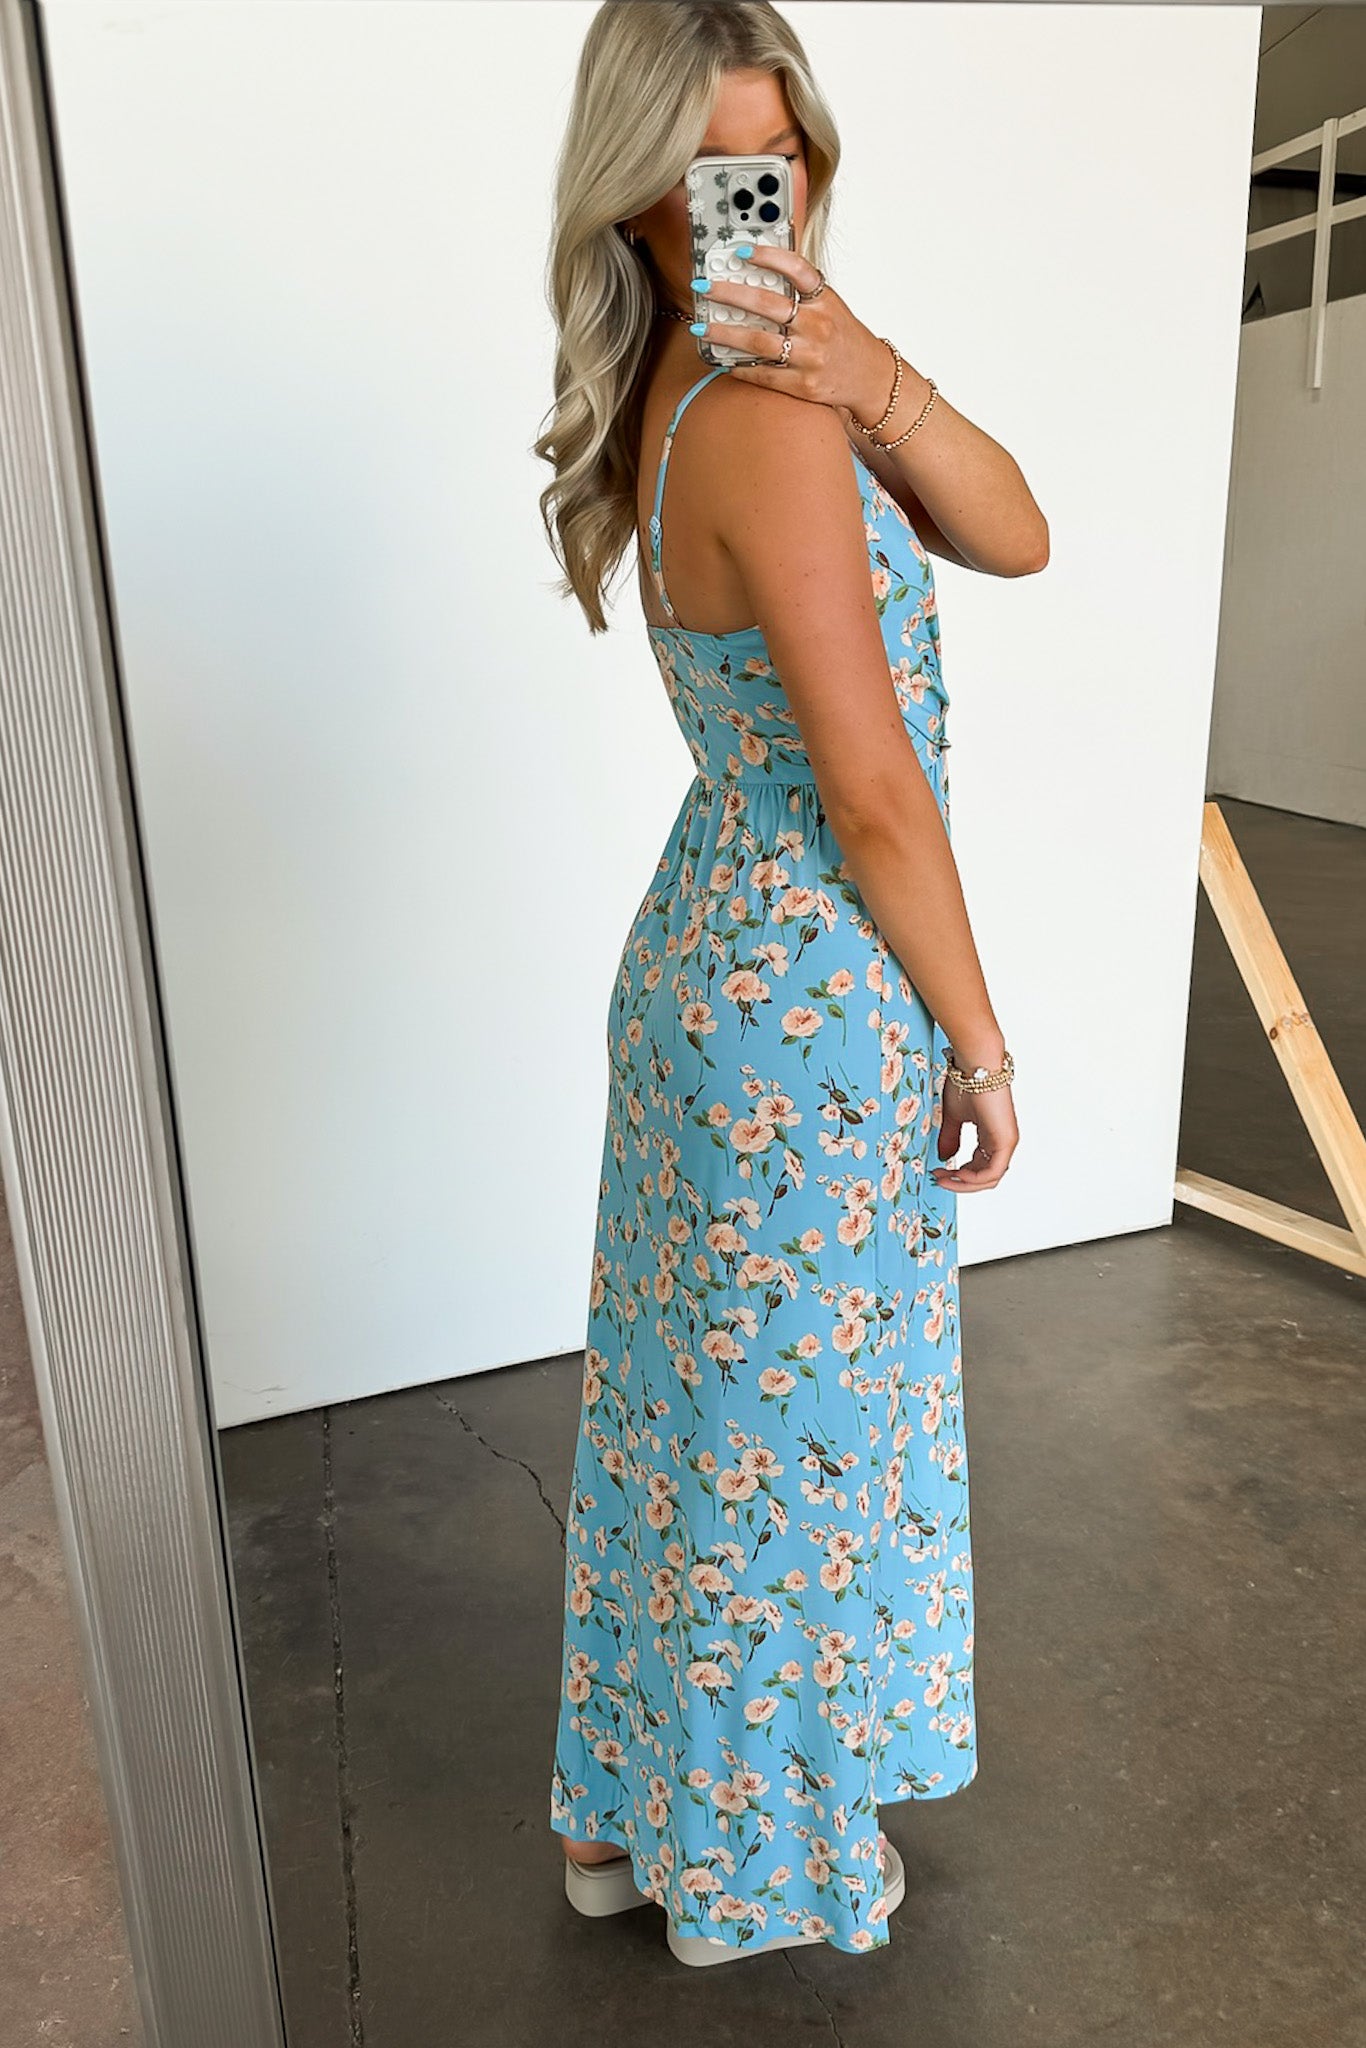  Perfectly Flirtatious V-Neck Floral Dress - Madison and Mallory